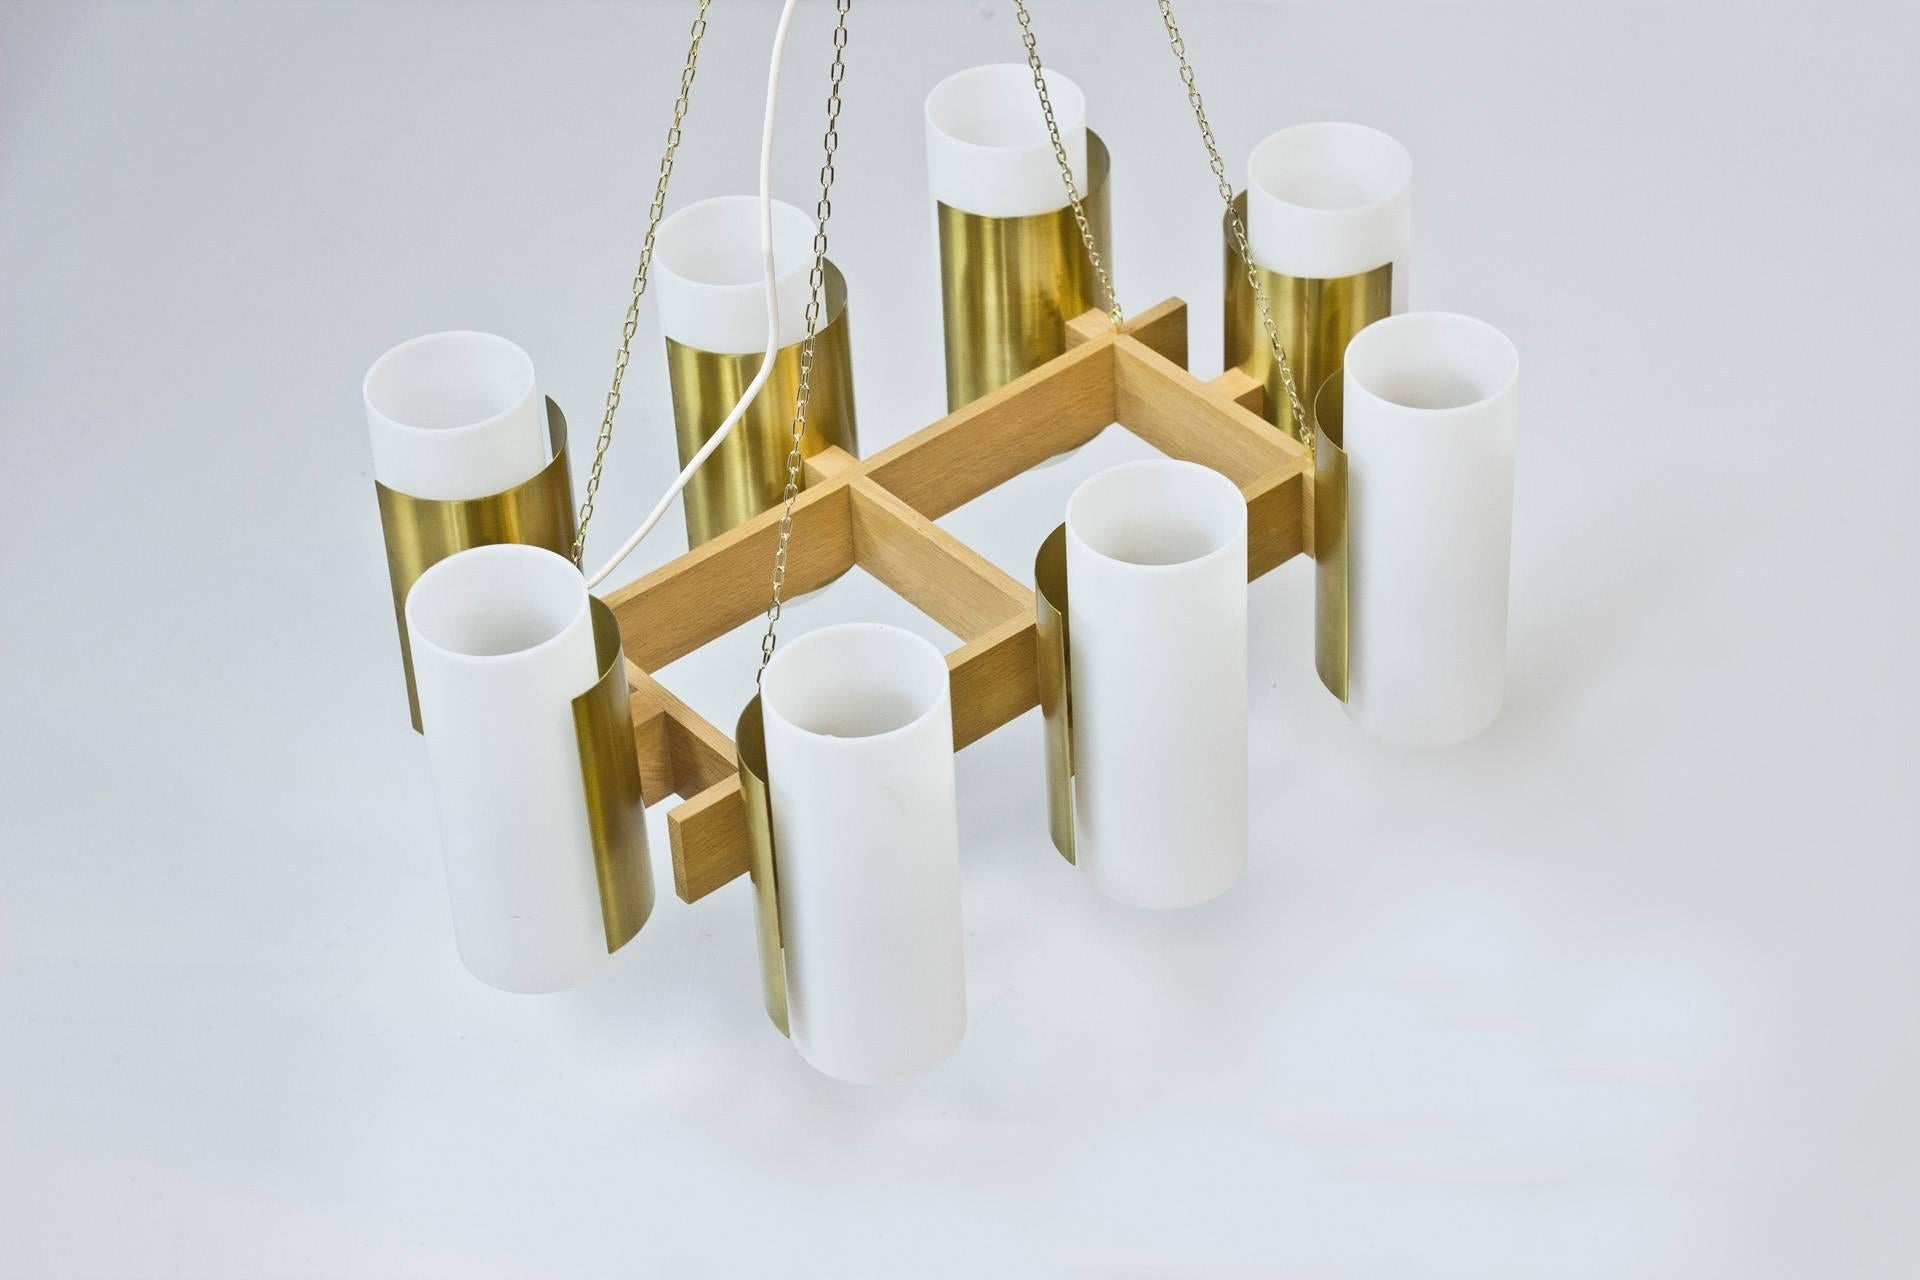 Unique set of four chandeliers designed by Sten Carlquist during the 1950s. Solid oak with dull polished brass diffusers and acrylic shades. Only remaining set from 